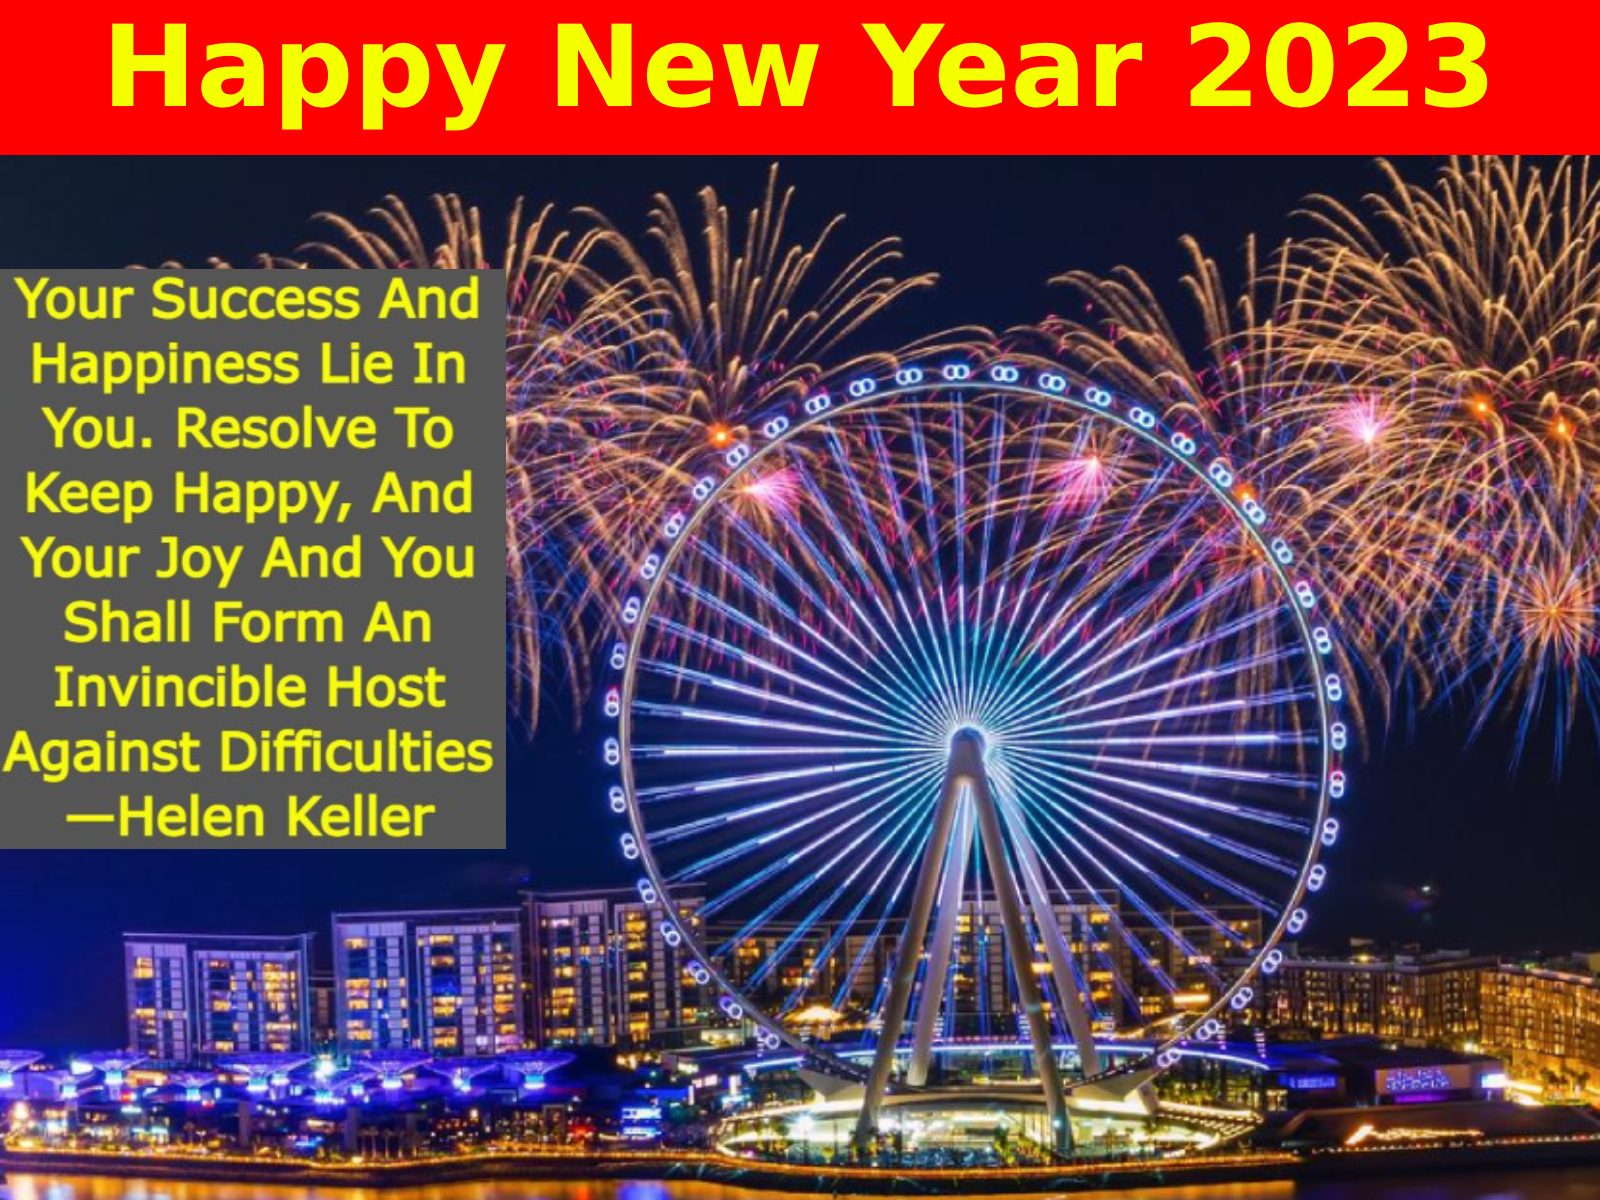 Happy New Year 2023: Wishes, Image, Quotes, Messages, Facebook and WhatsApp Greetings to Share with Boss, Colleagues